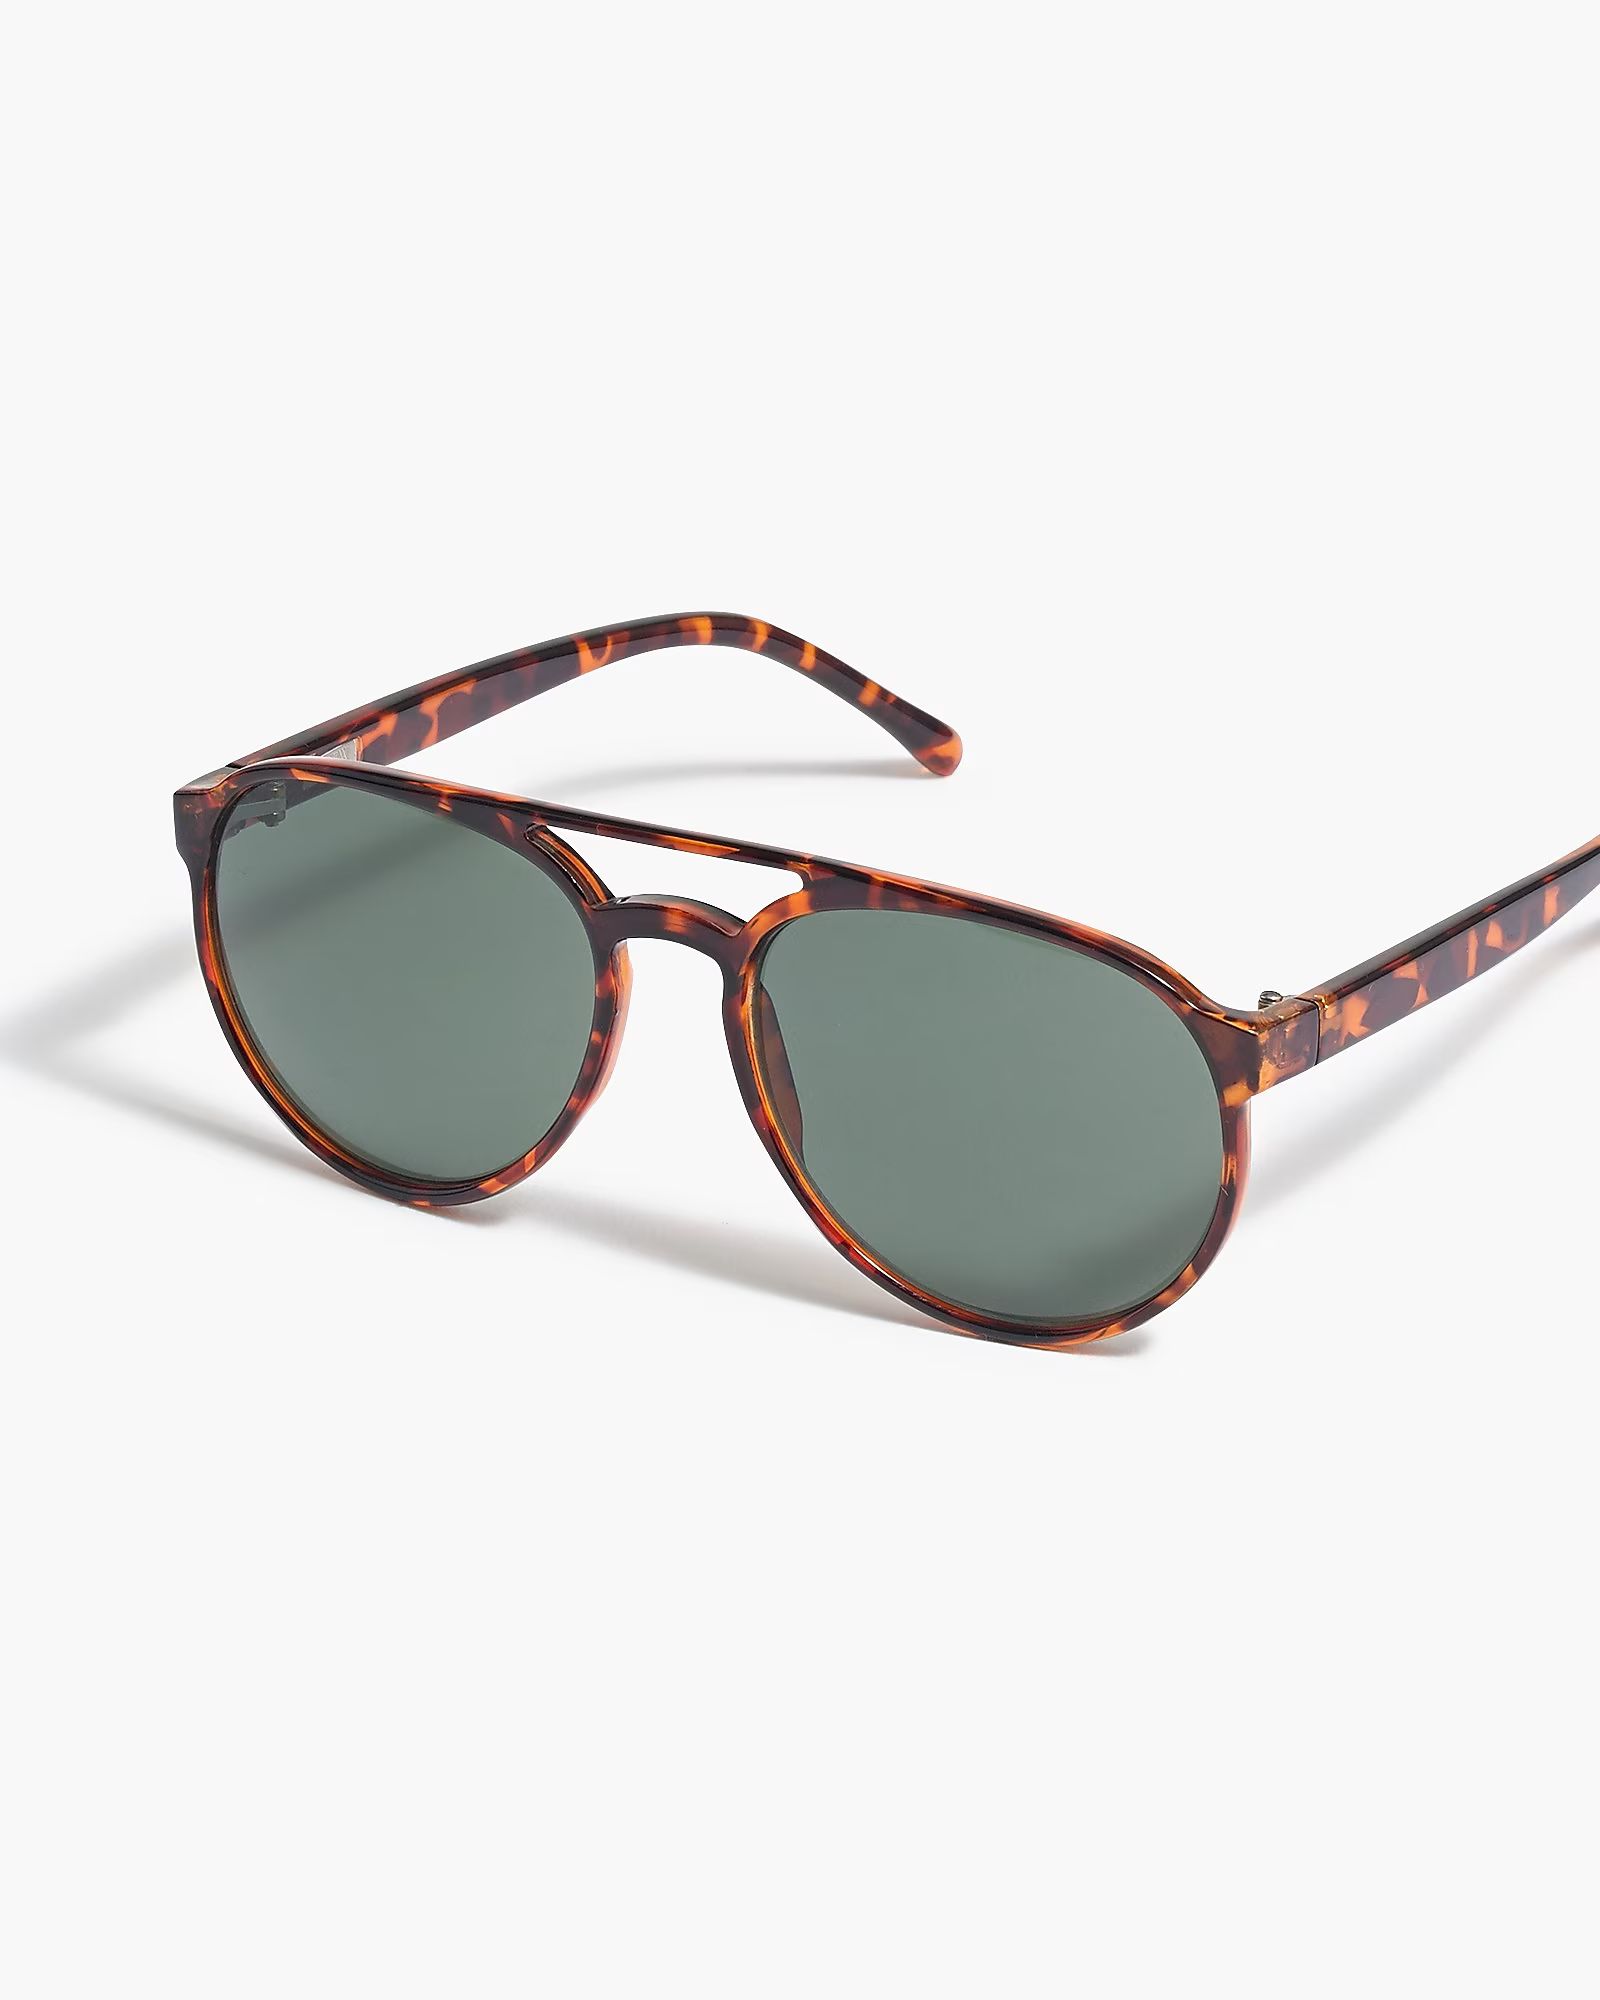 3.8(22 REVIEWS)Aviator sunglassesComparable value:$39.50Your price:$23.70 (40% off)Passport membe... | J.Crew Factory